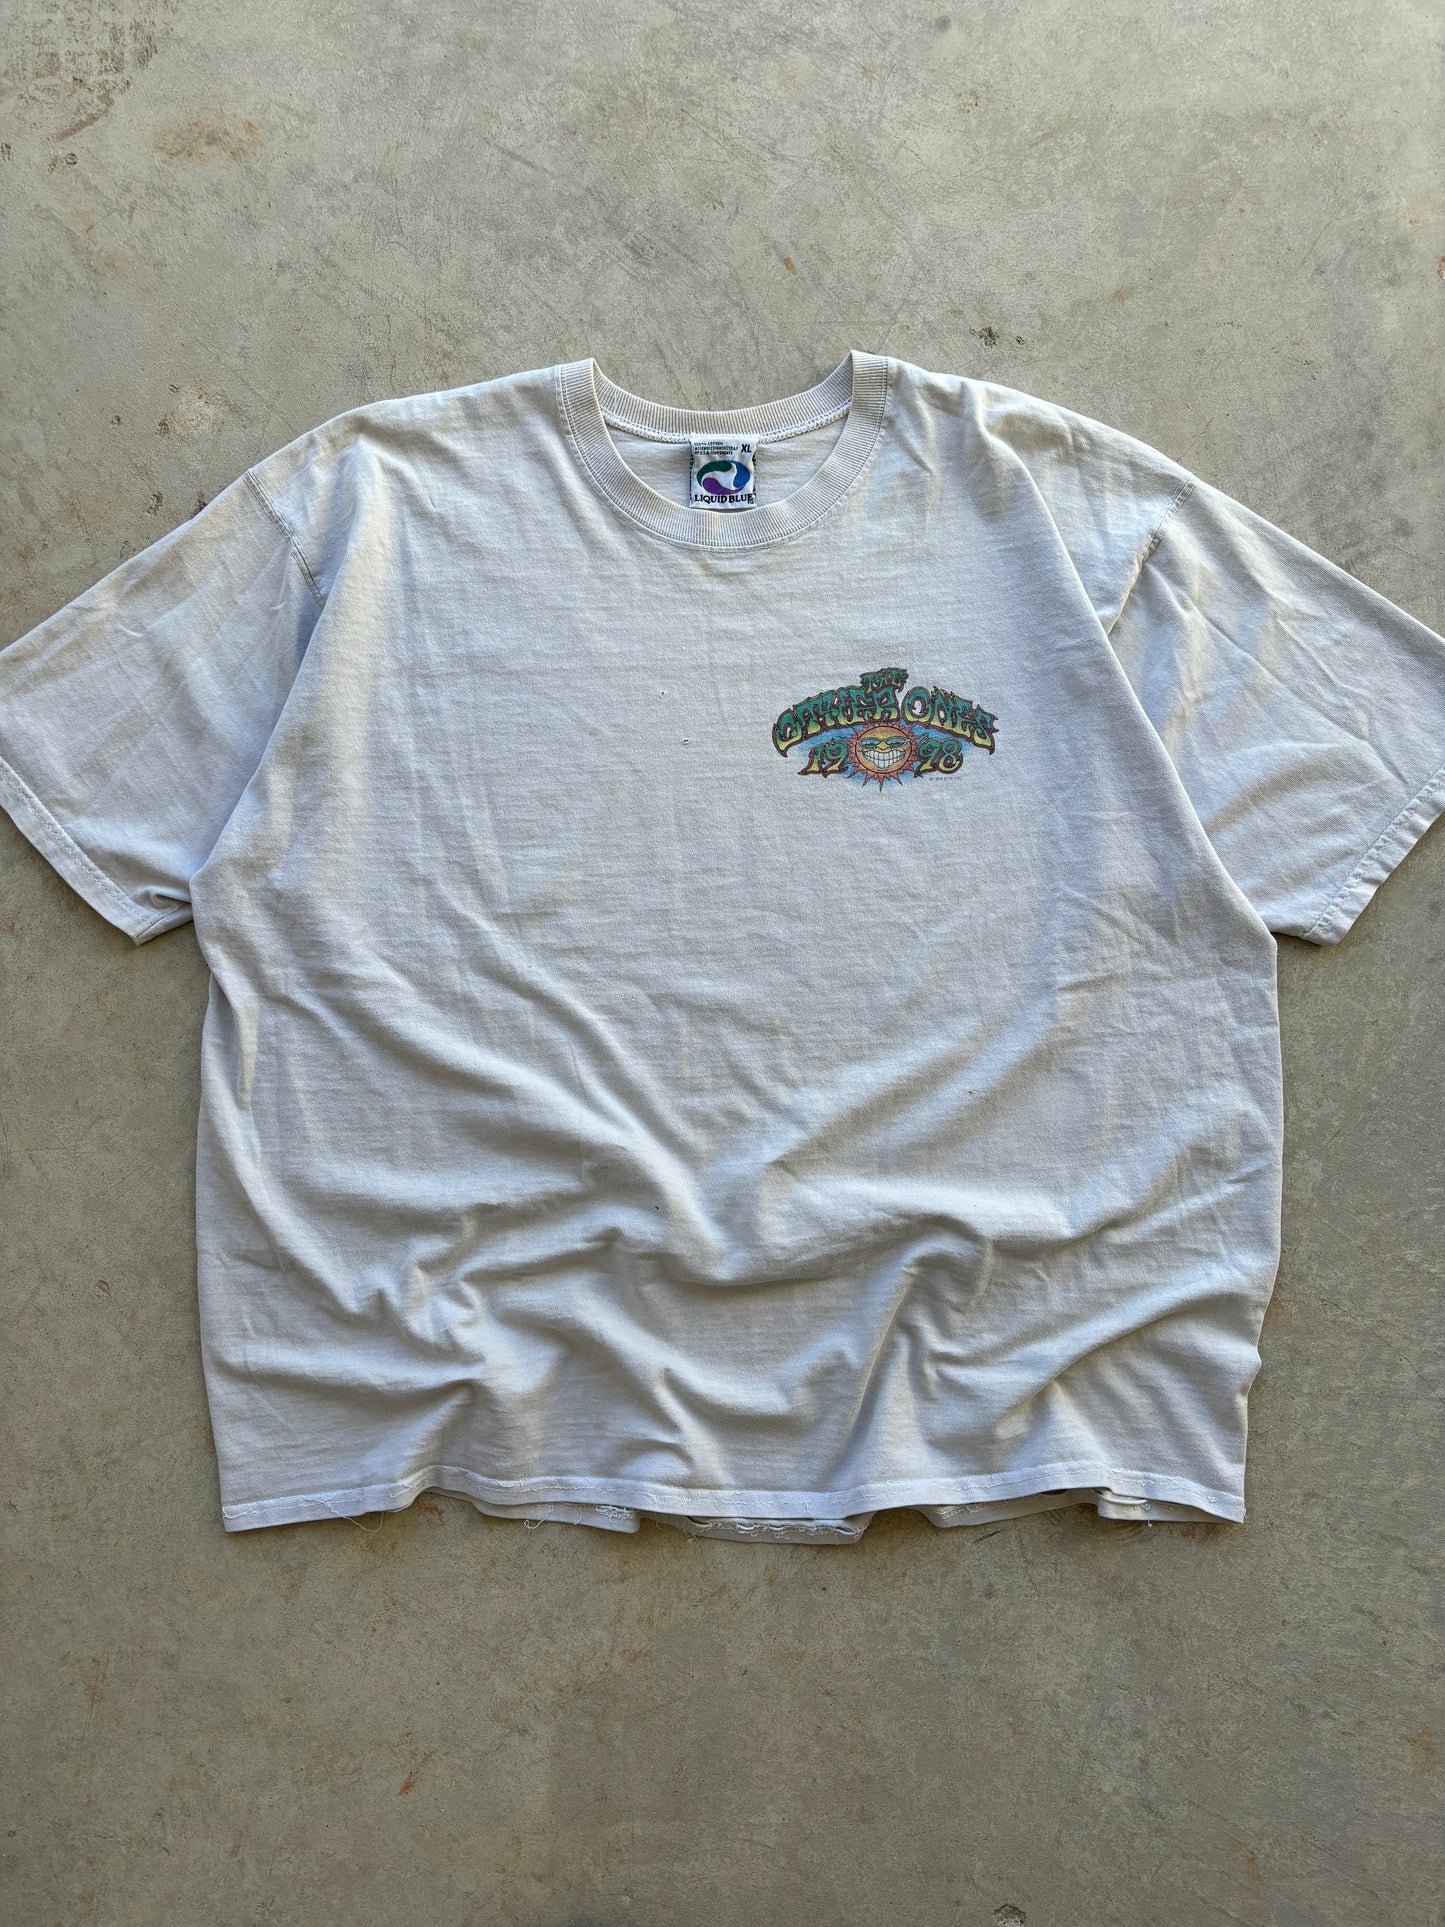 1998 Grateful Dead The Other Ones Tee Size XL